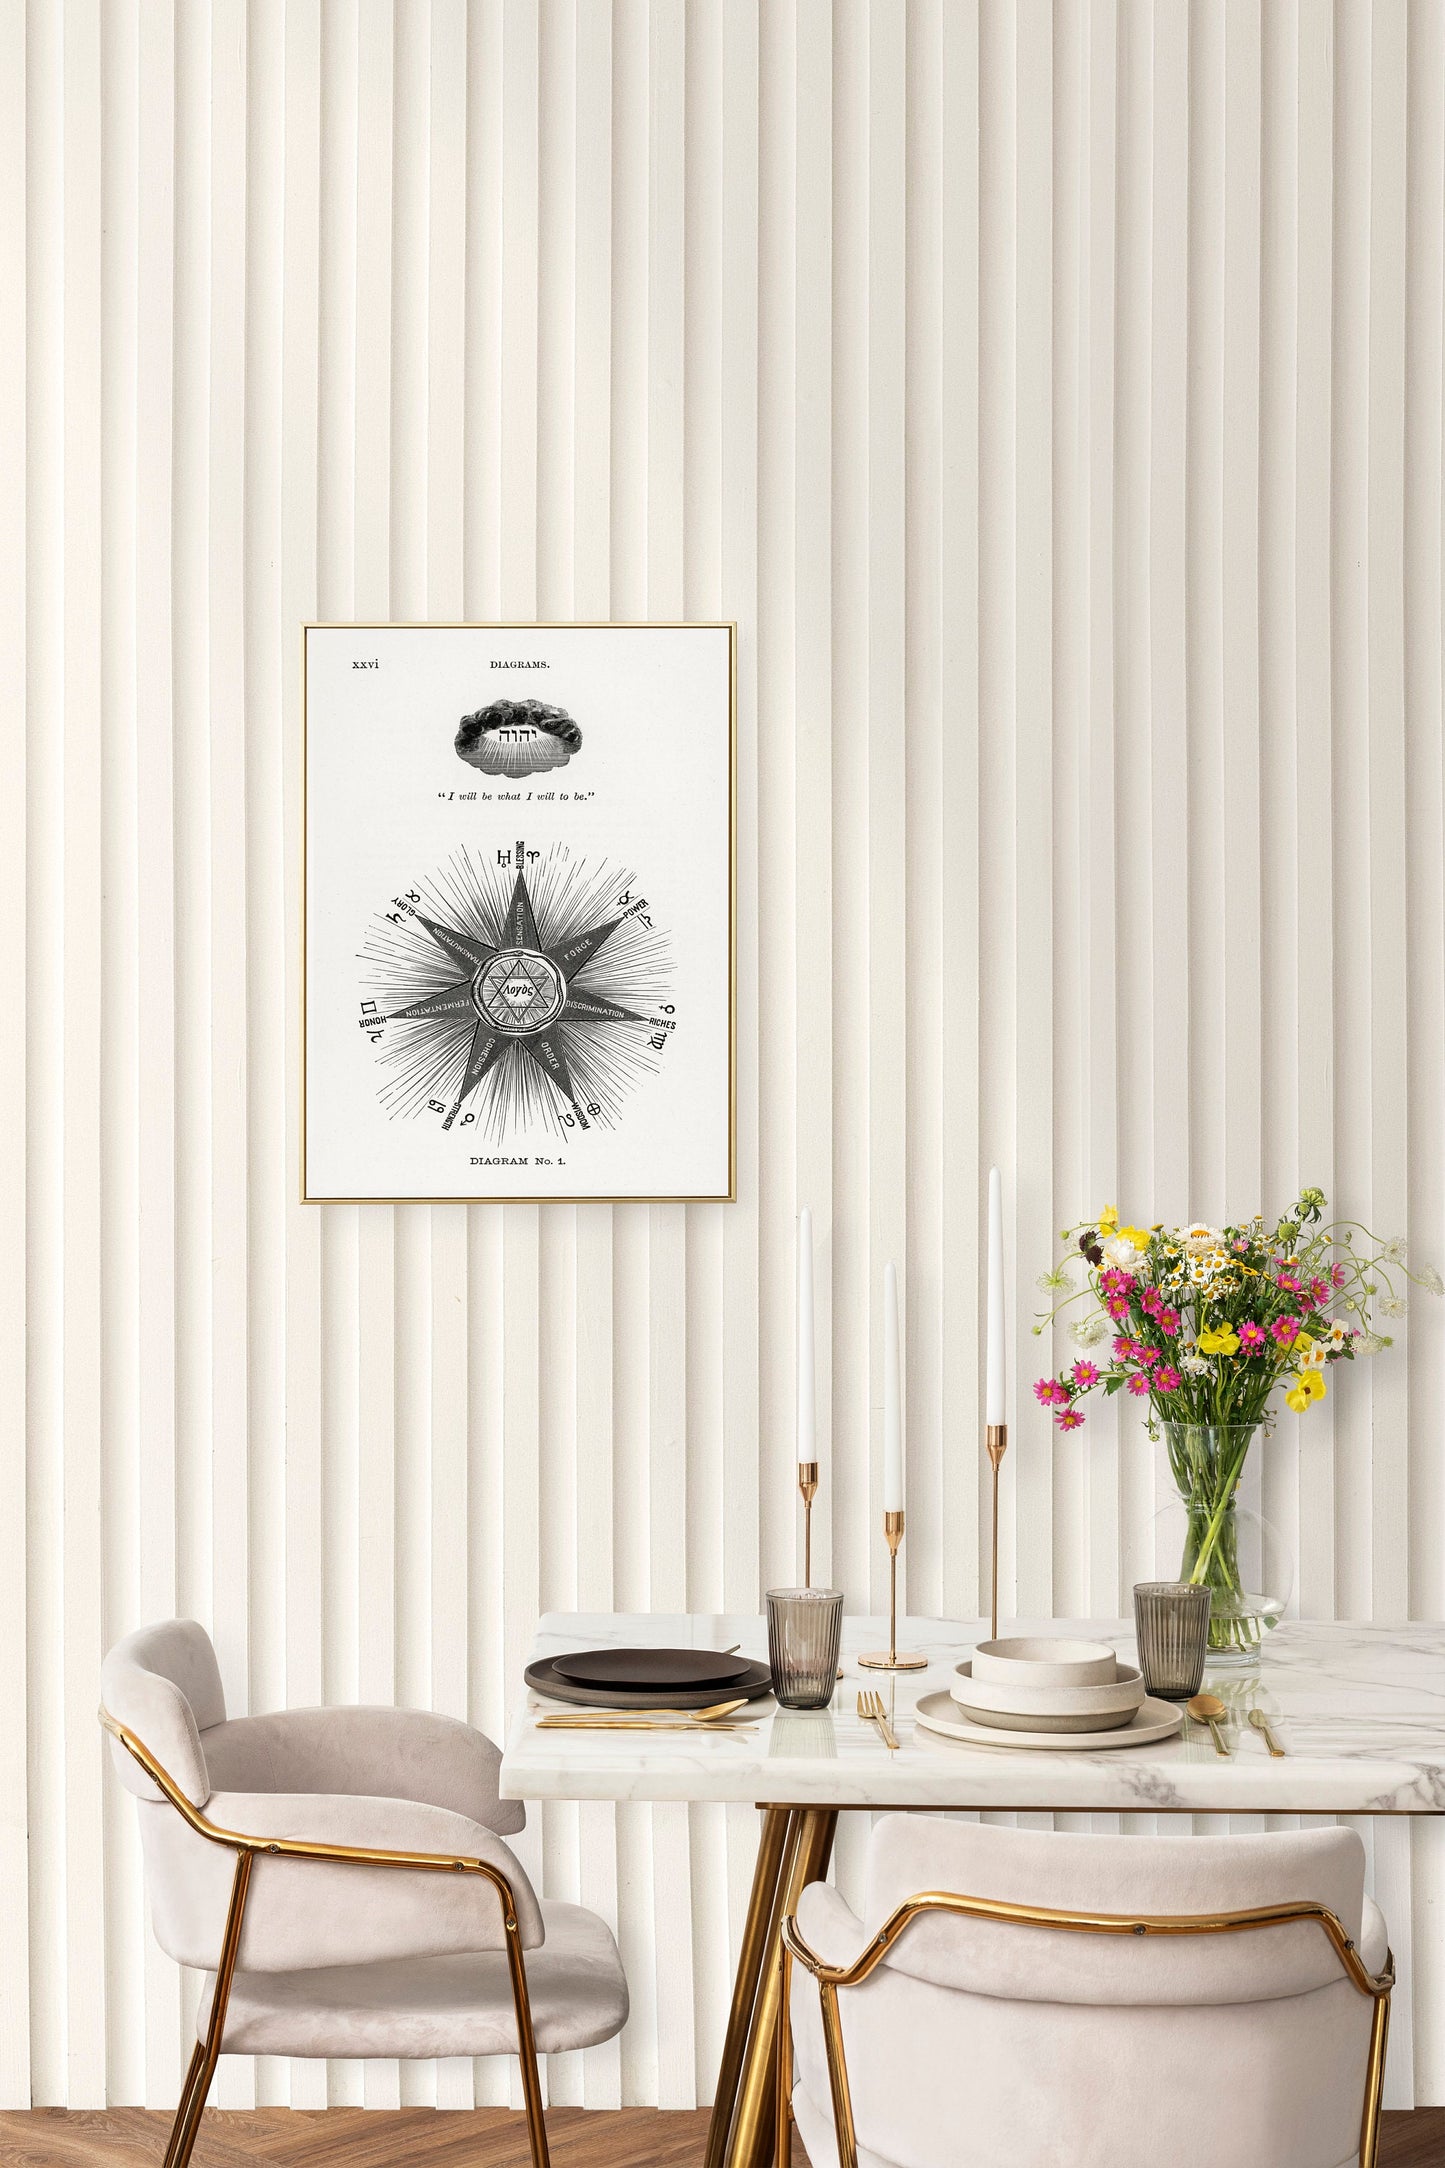 Astrology Diagram with Inspirational Quote Poster Illustration Print Wall Hanging Decor A4 A3 A2